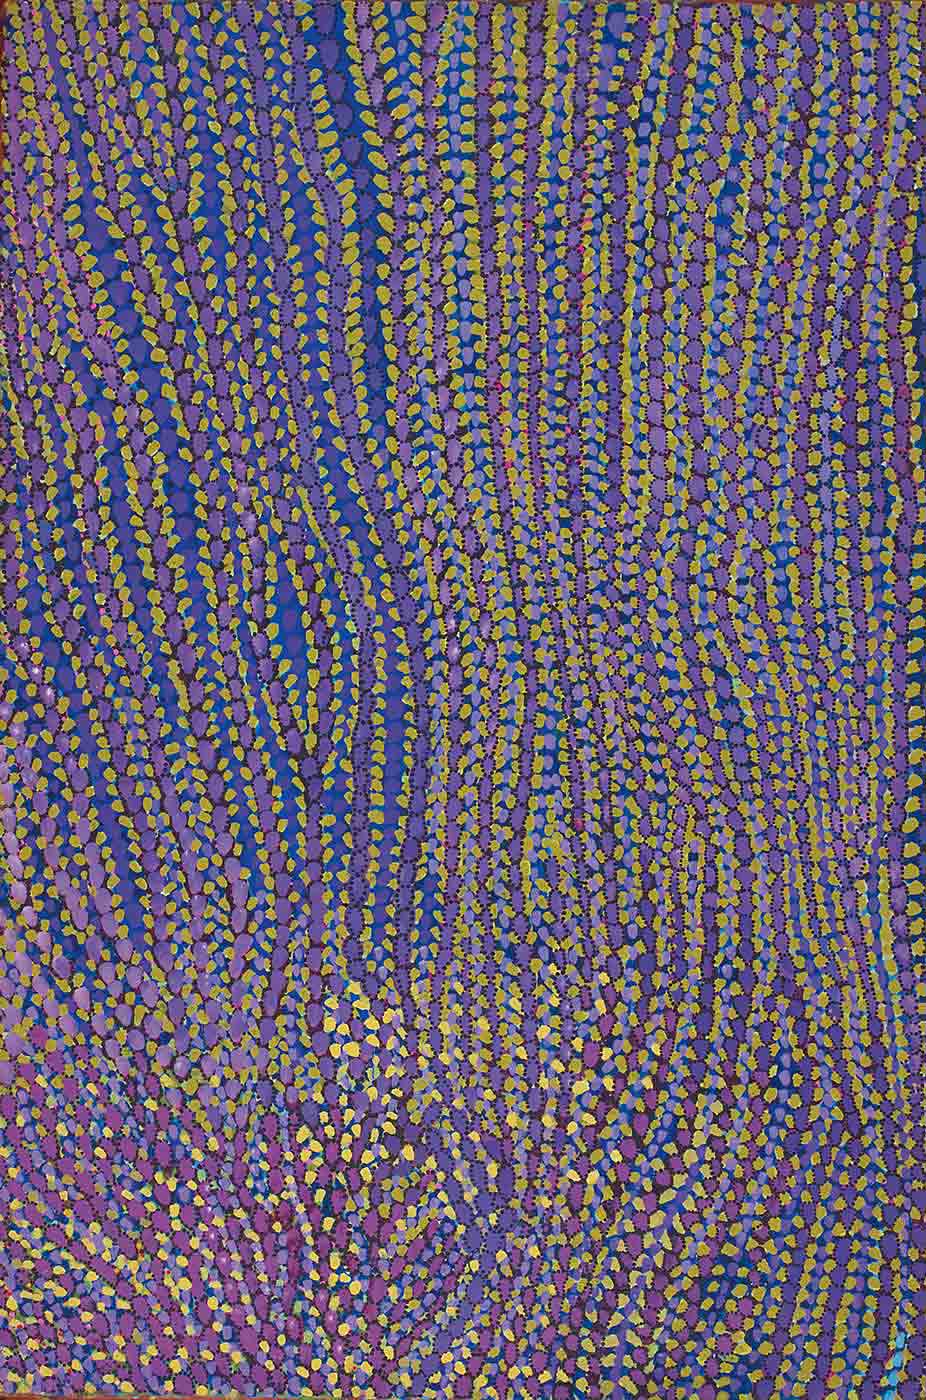 A purple toned dot painting on brown linen with wavy vertical lines of purple-lavender dots interspersed with rows of olive green dots on a blue background. The lines of darker purple dots have smaller black dots outlining each of purple dots. Towards the bottom of the painting there is a scattering of pale yellow dots, and towards the top of the painting there are a few dark pink dots. - click to view larger image